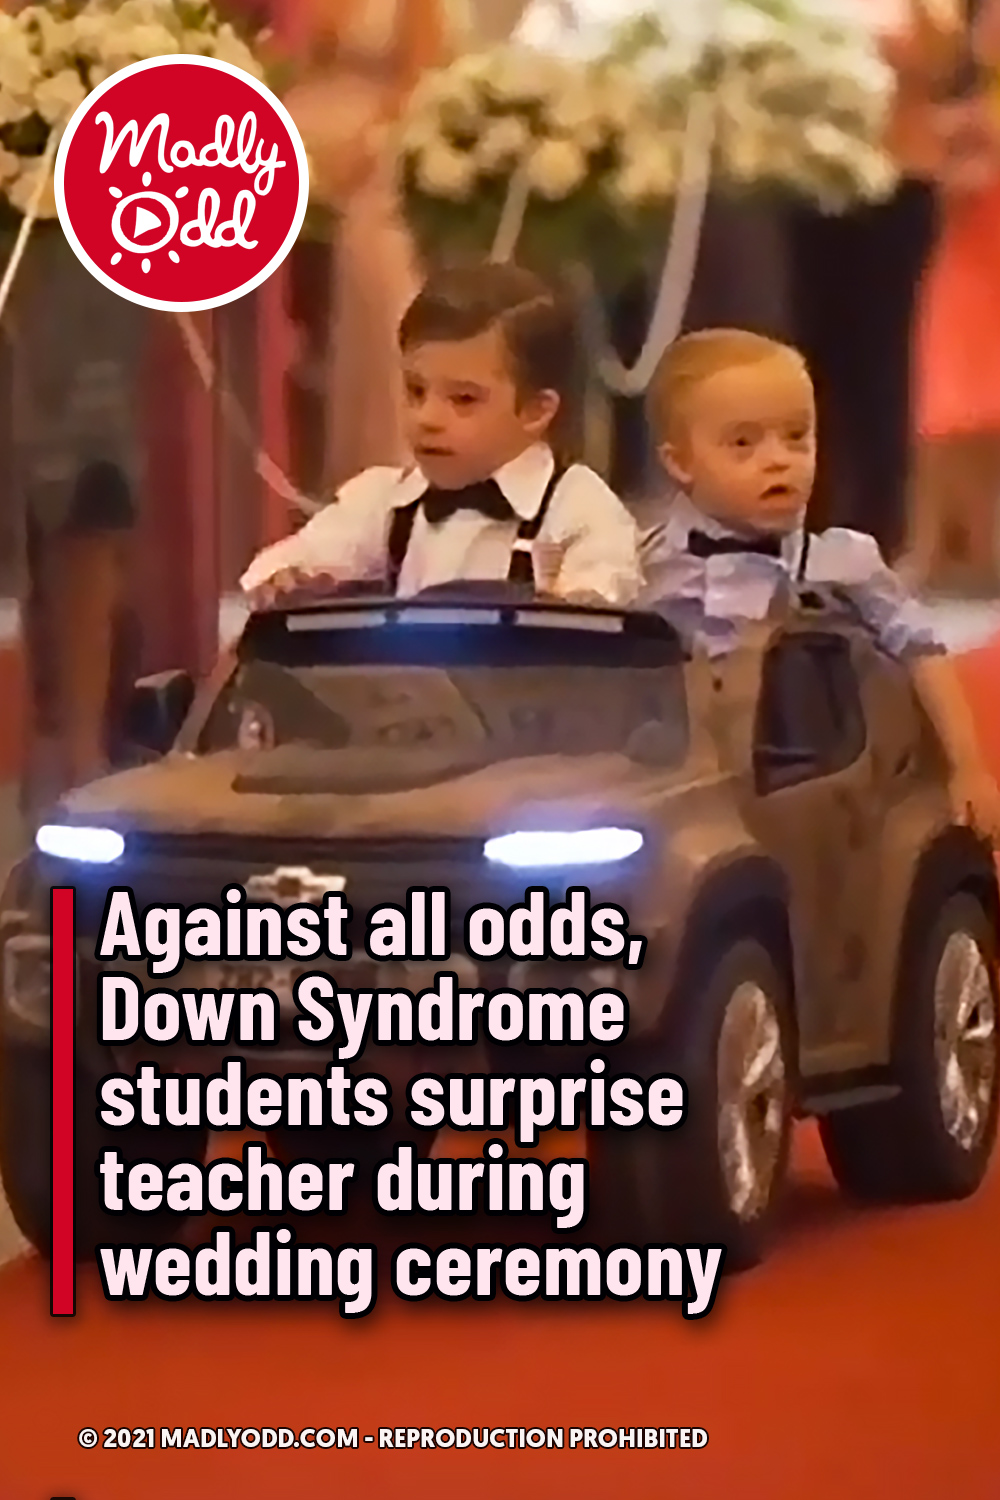 Against all odds, Down Syndrome students surprise teacher during wedding ceremony